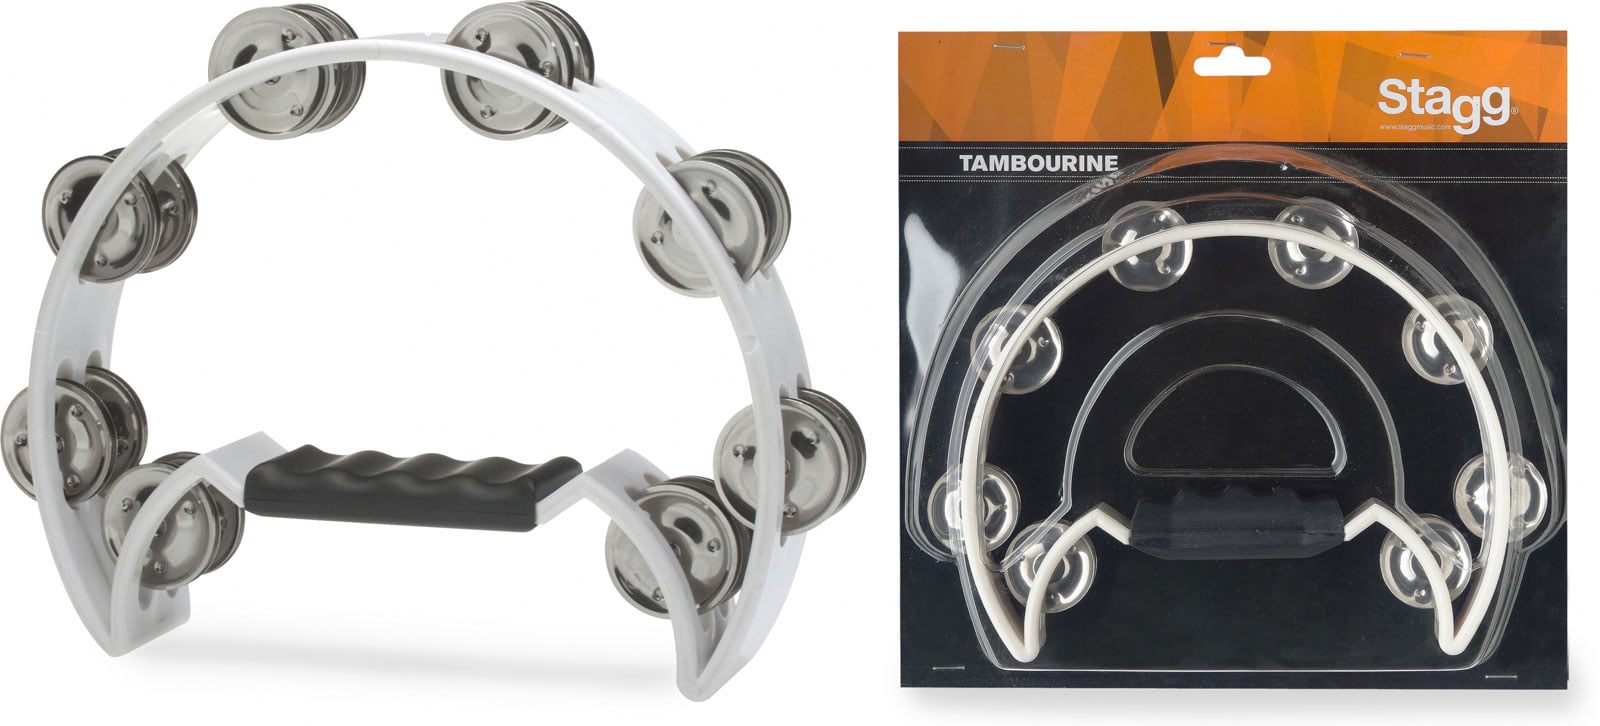 STAGG TAMBOURIN 1/2 LUNE 16 CYMBALETTES BLANC